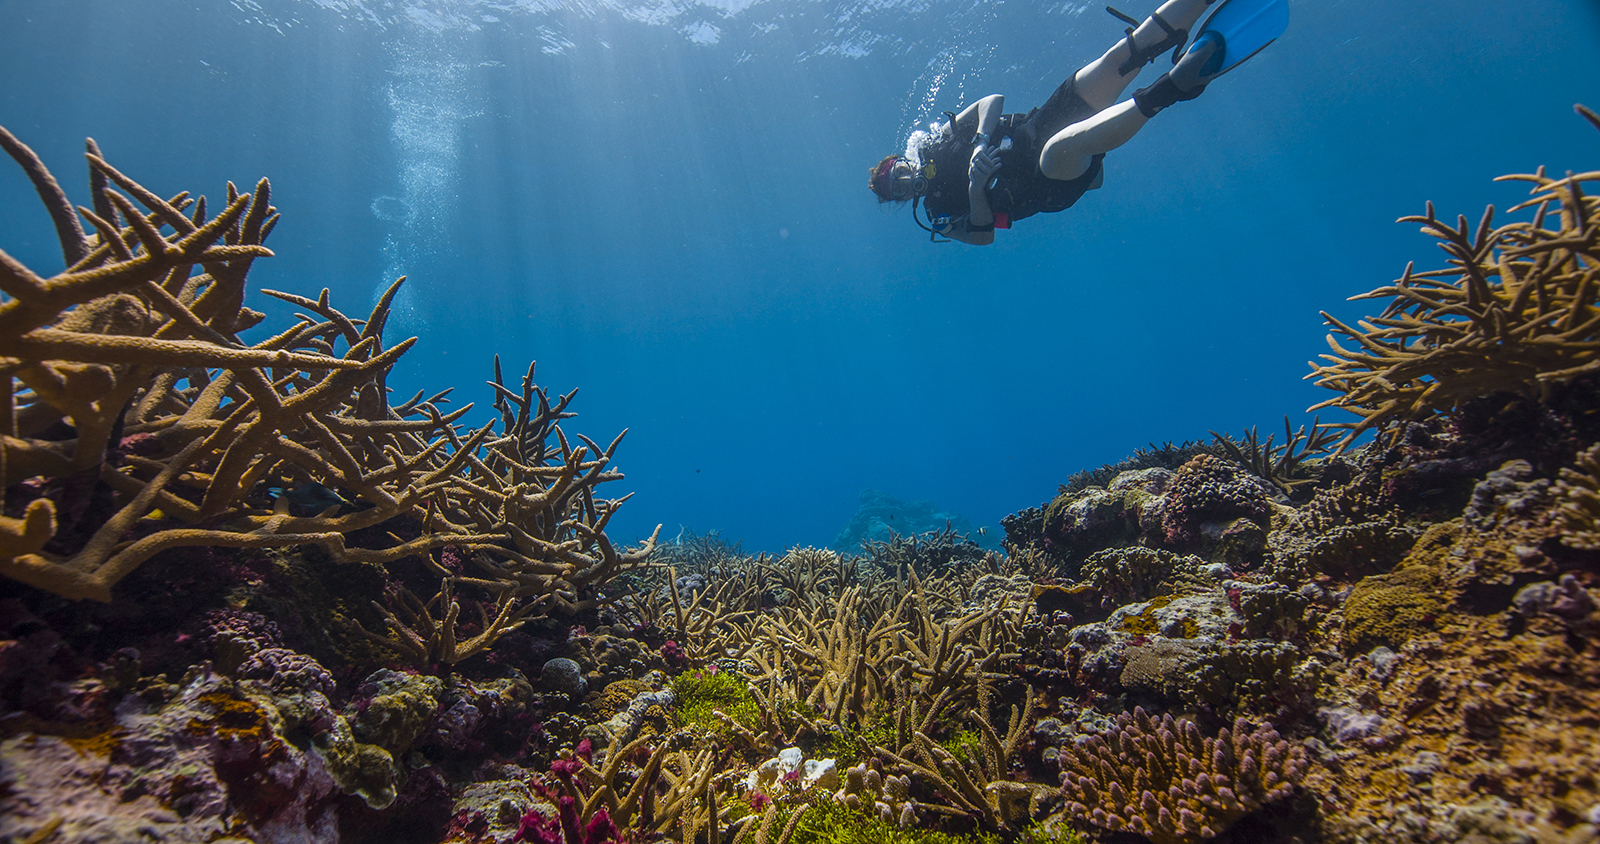 A diver swims above coral